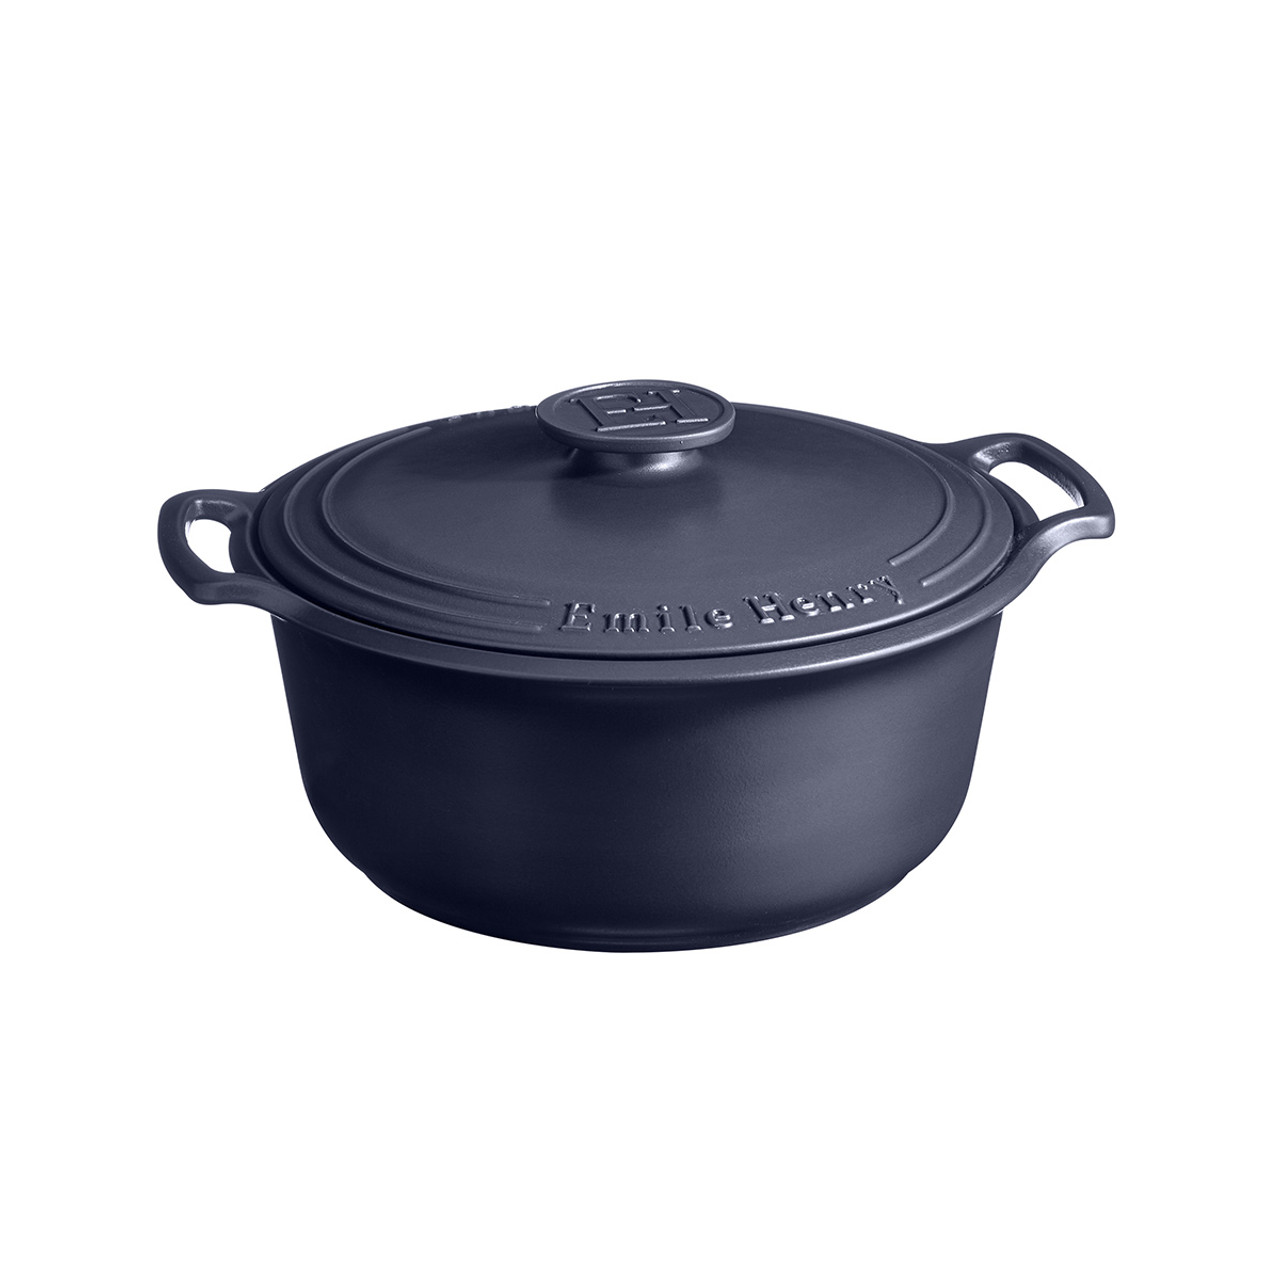 Emile Henry Sublime Sienna Red Dutch Oven